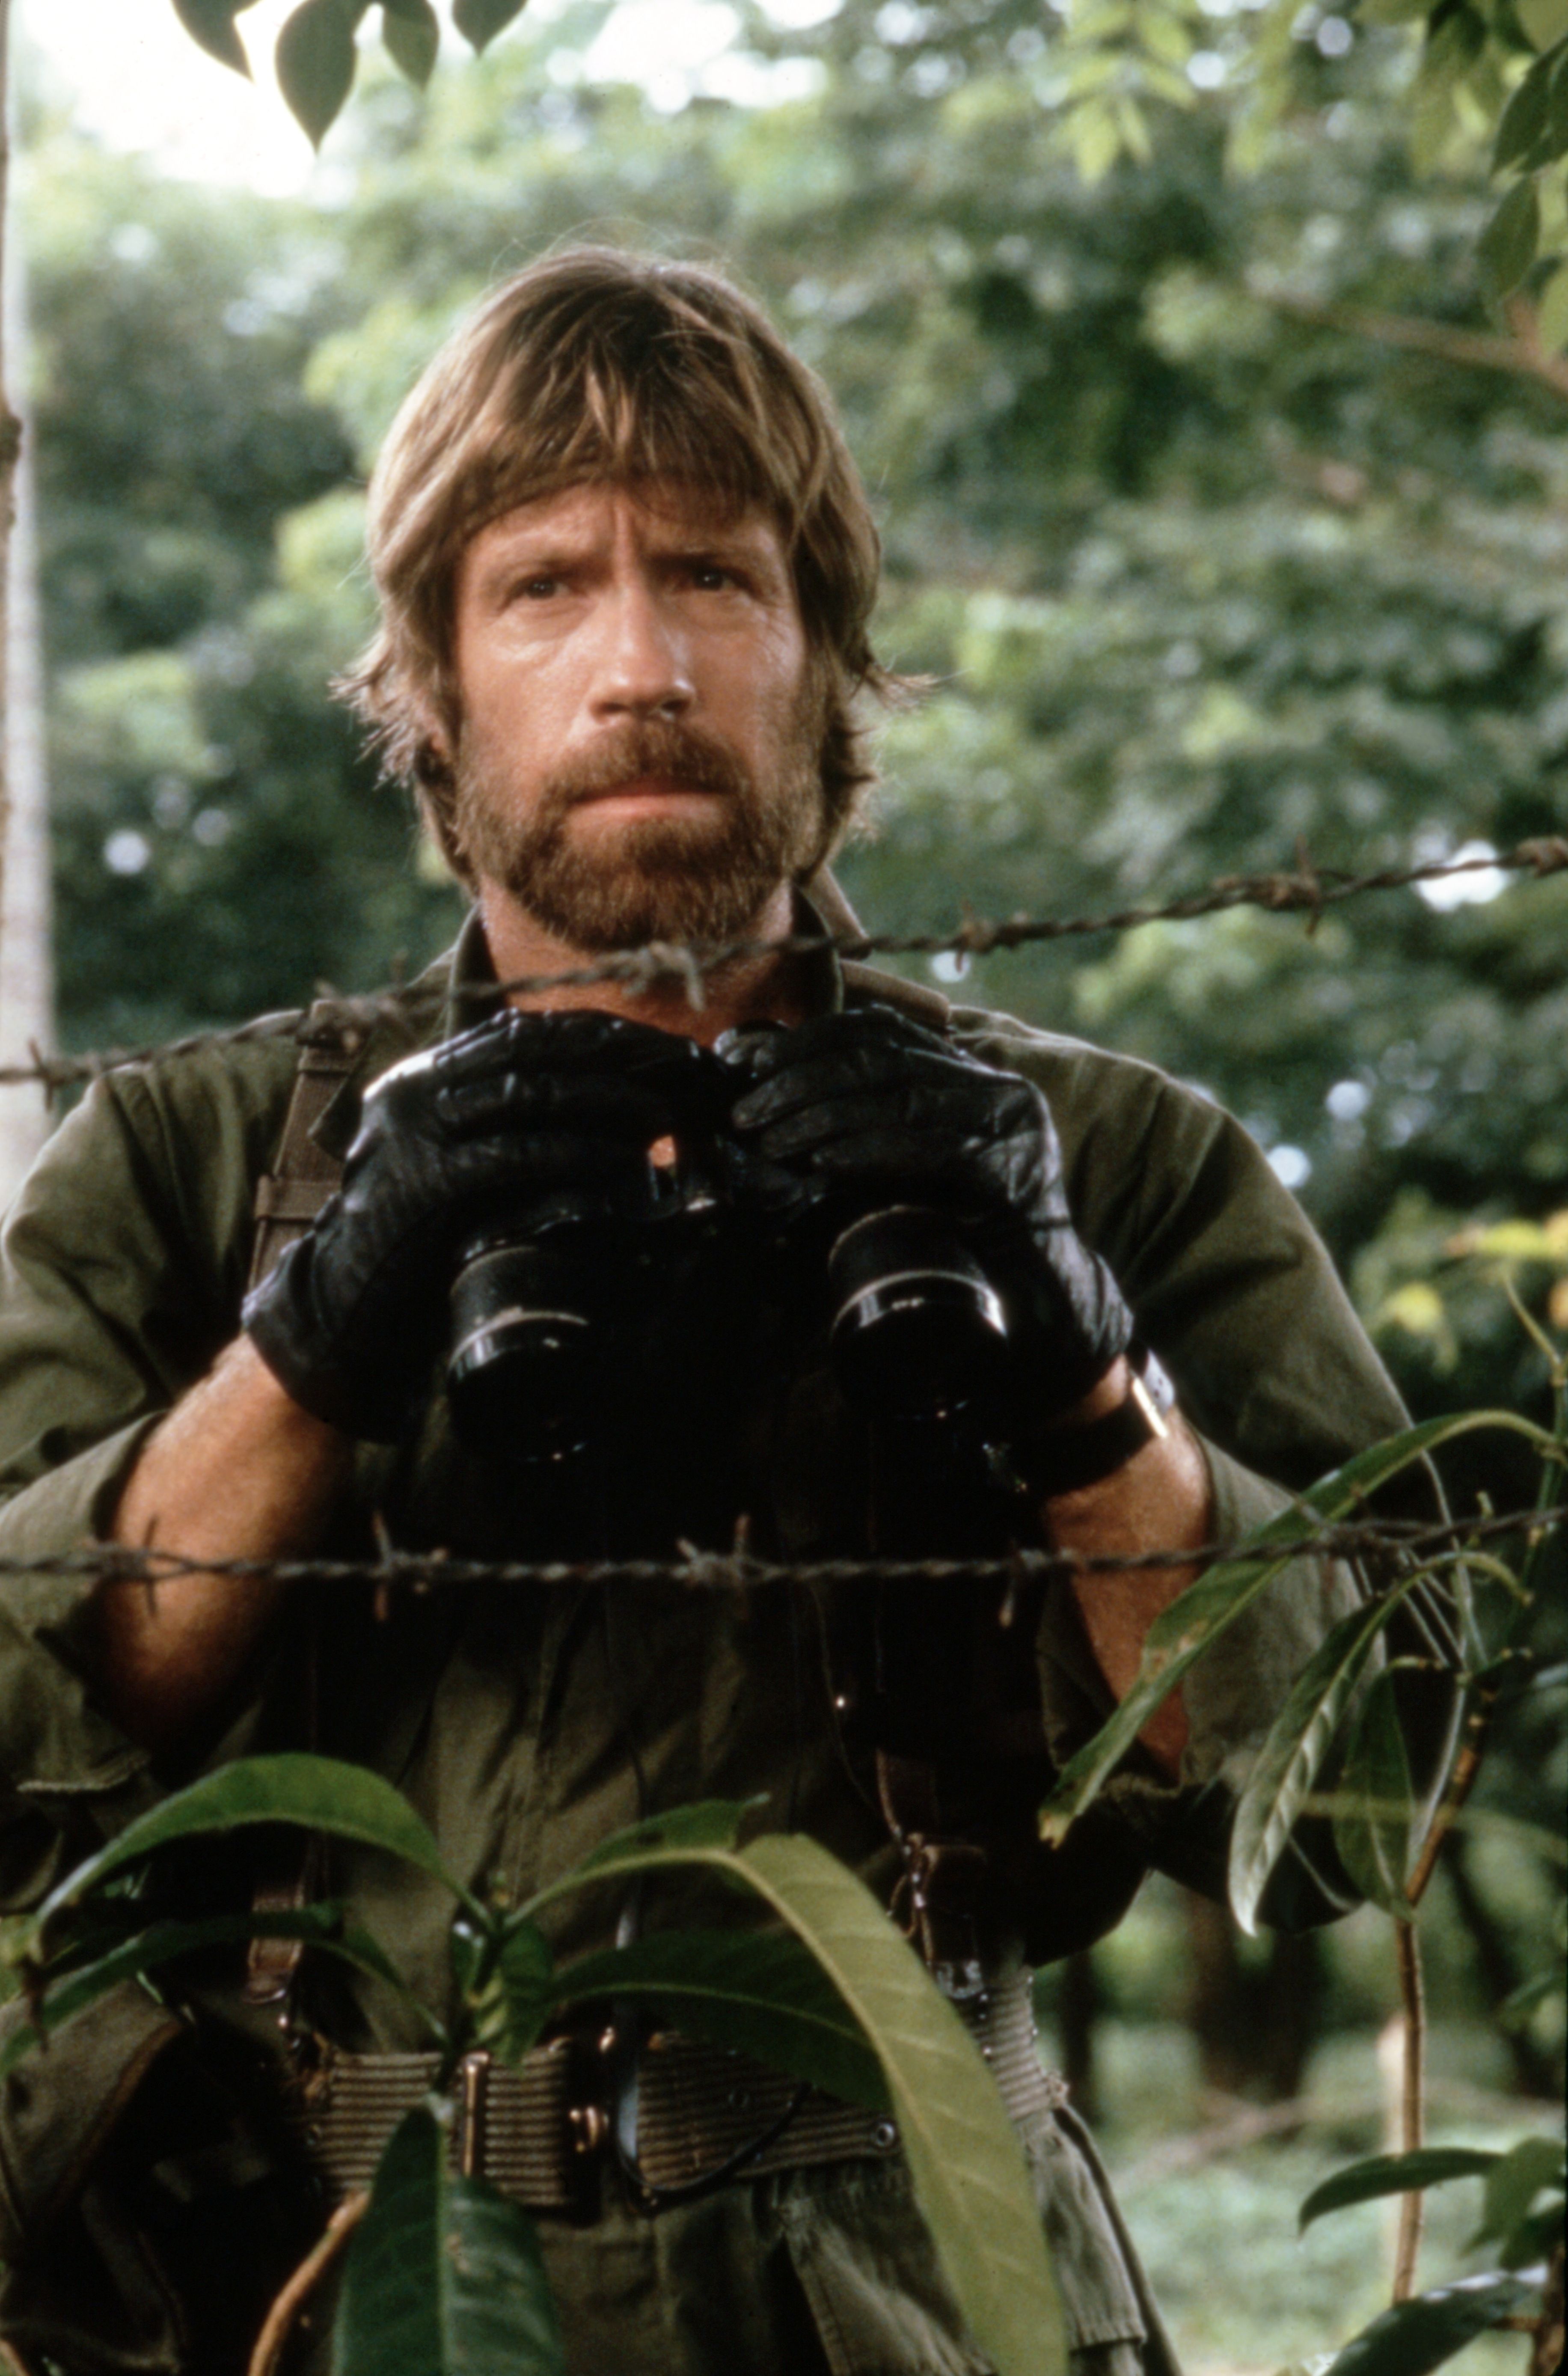 Chuck Norris in the 1984 film "Missing in Action" directed by Joseph Zito. | Source: Getty Images